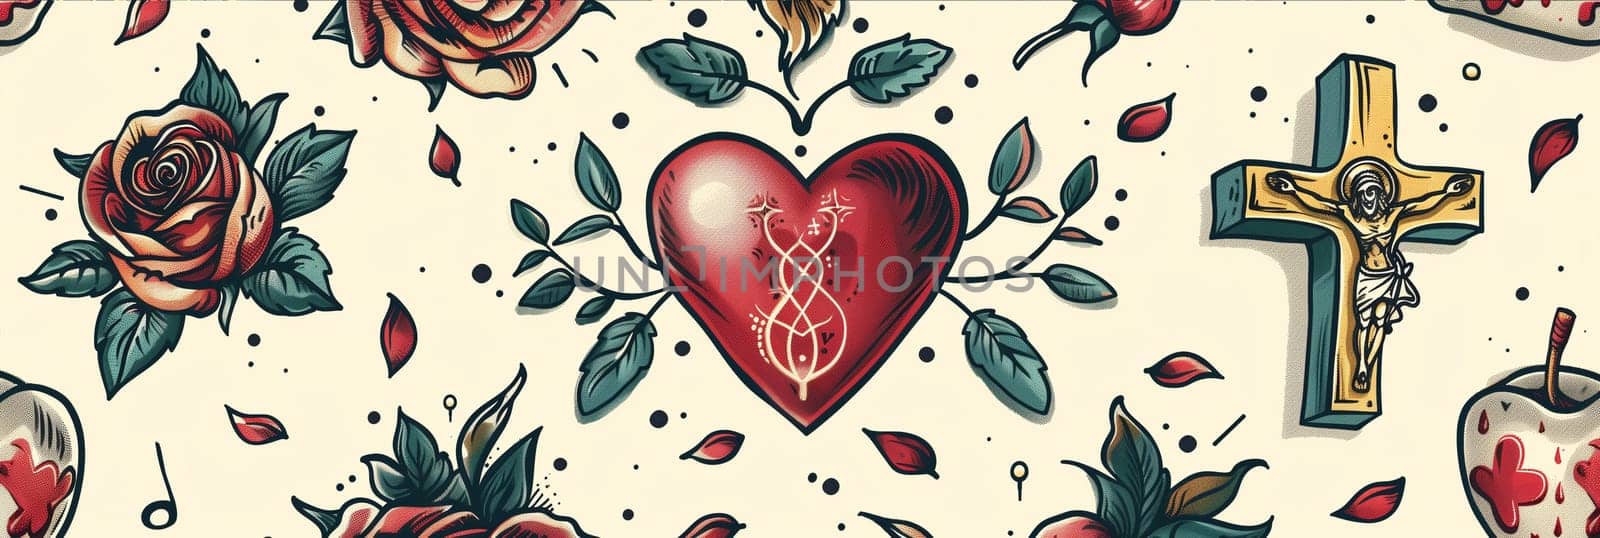 A cross adorned with vibrant red roses against a clean white background.